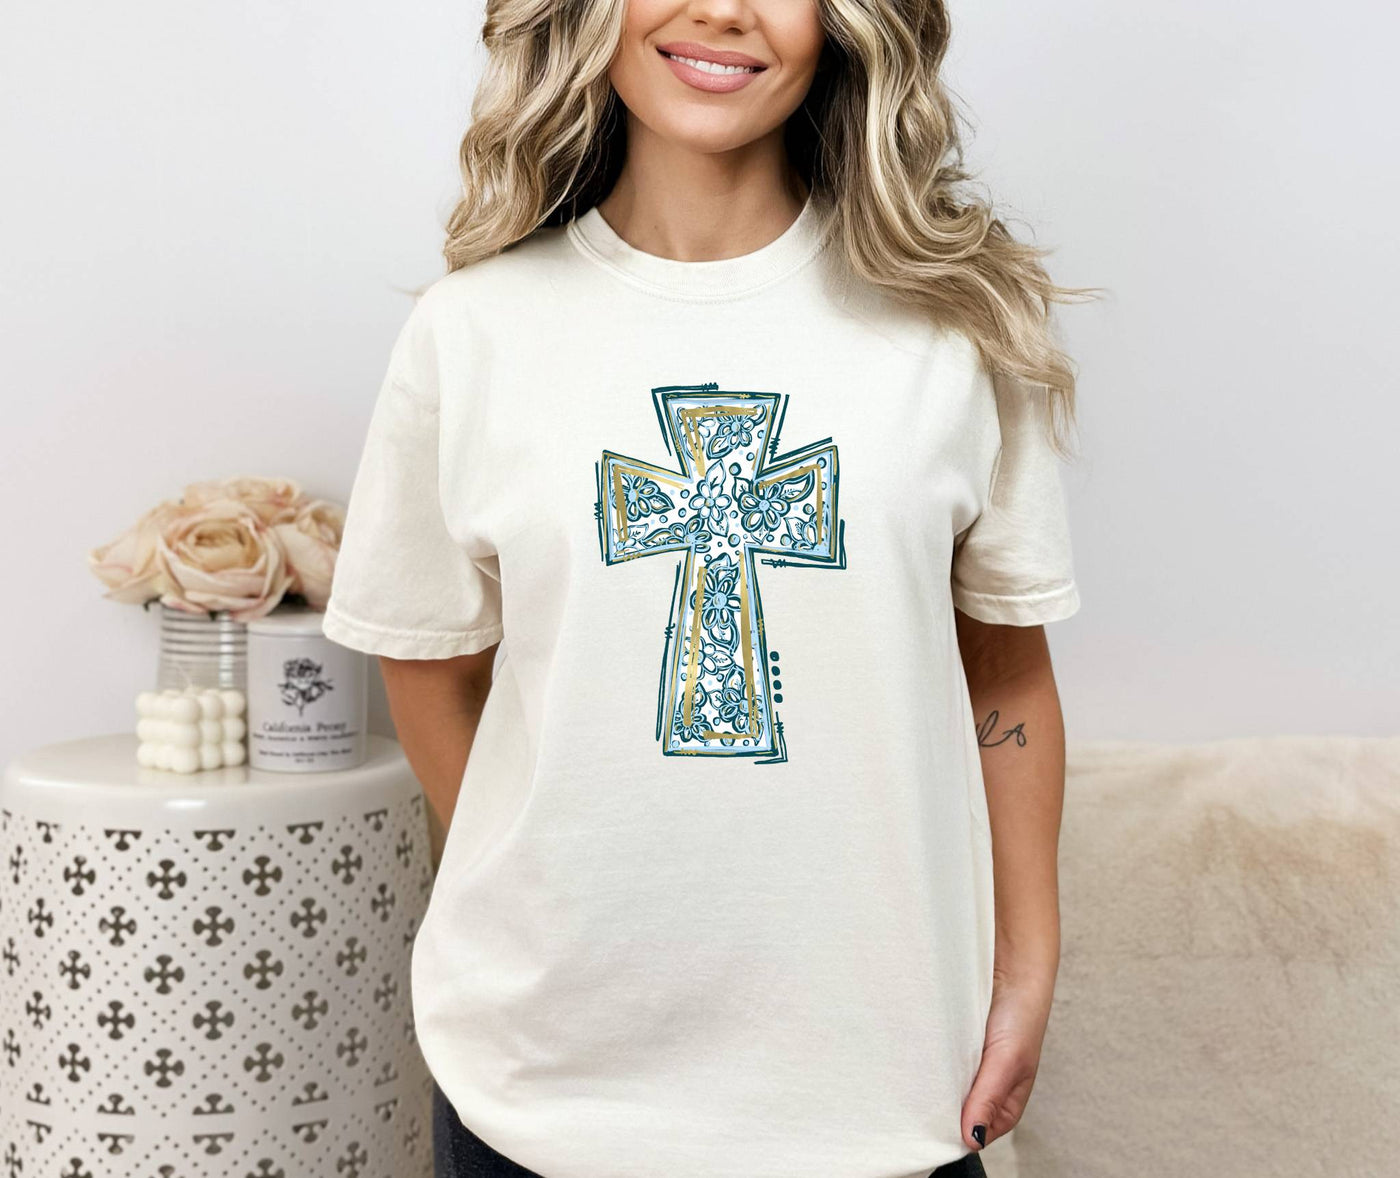 Blue and white floral cross - RTS 2/26